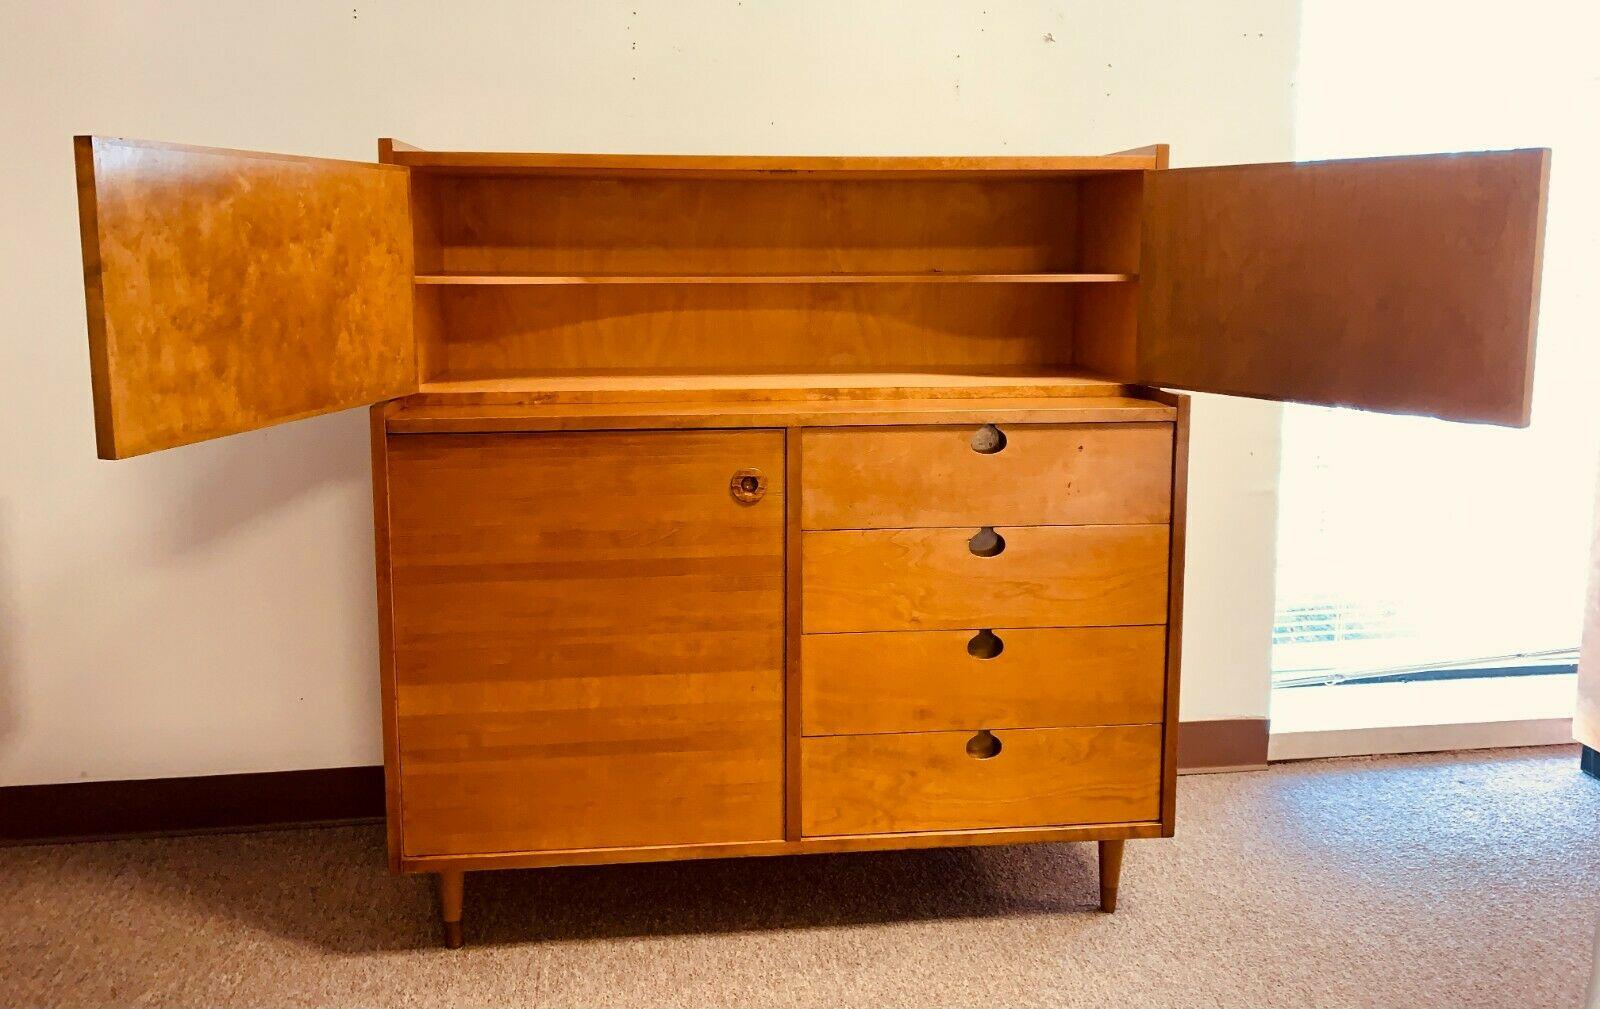 A fantastic high boy dresser, perfect for organization or bedroom storage. This piece includes 4 pull-out drawers along side a 3 enclosed shelves. The top storage includes one shelf which runs the length of the dresser. In good vintage condition,